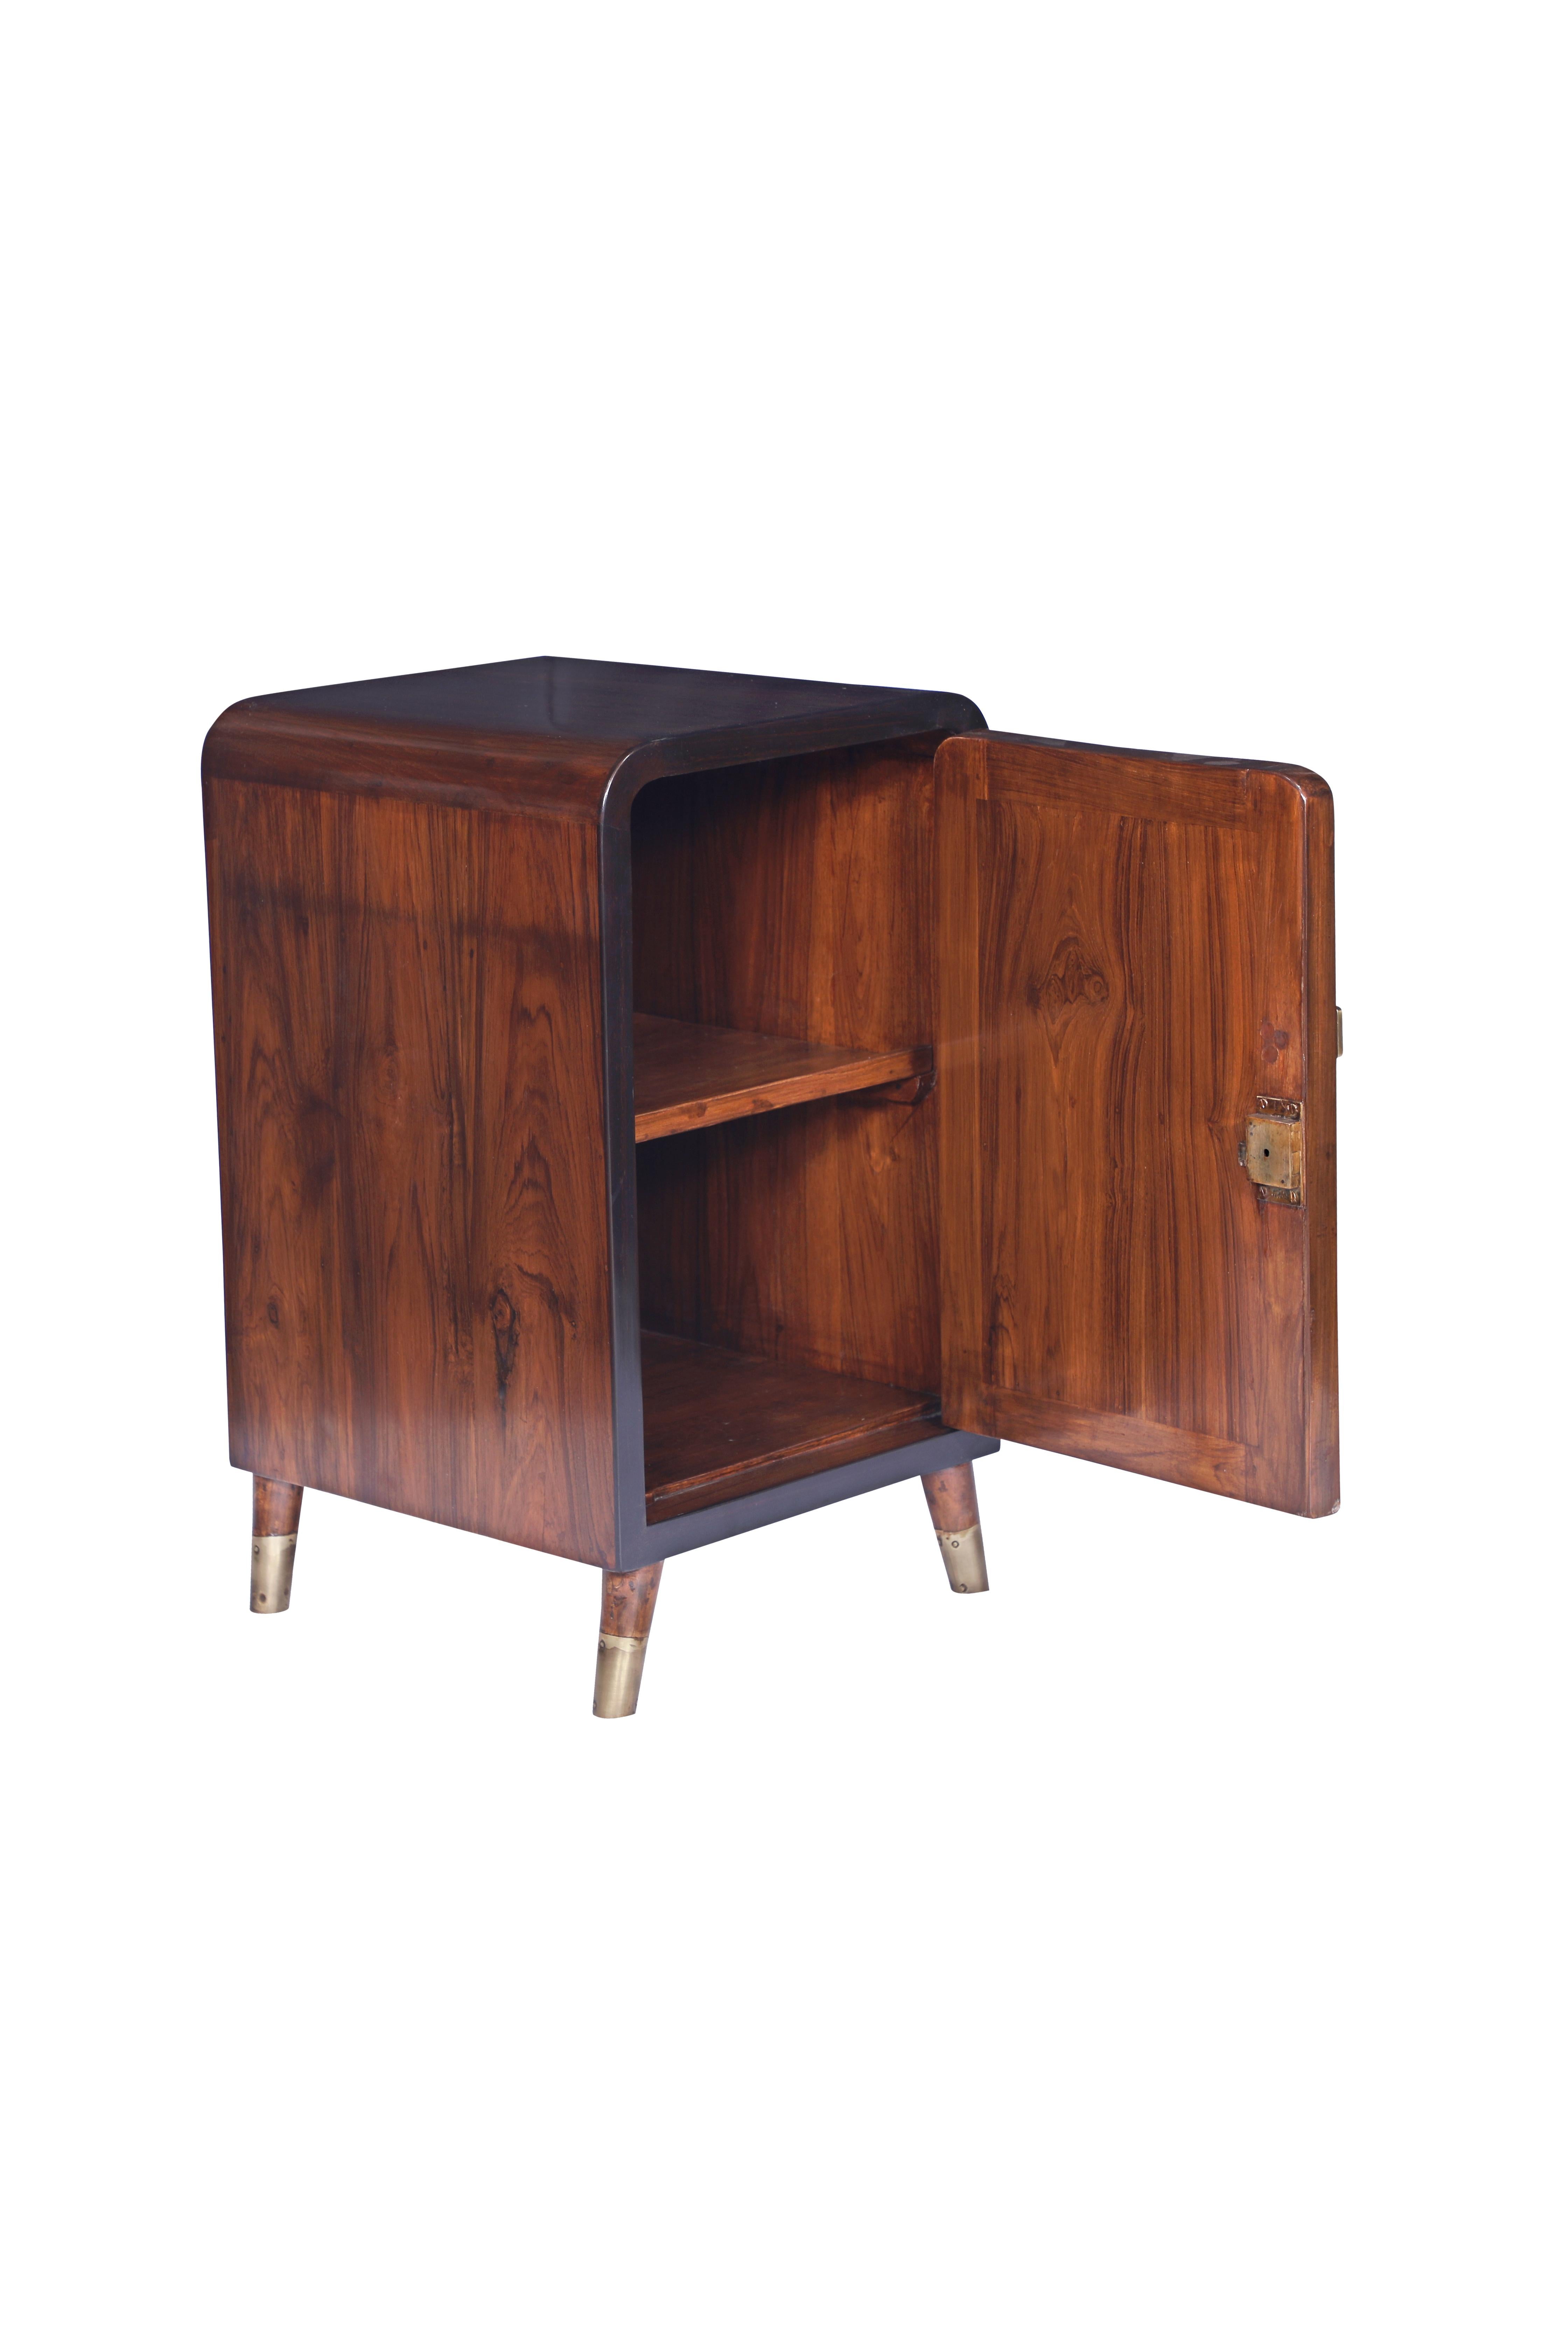 Pair of Teak and Rosewood End or Side Tables, Mid-Century Modern 1